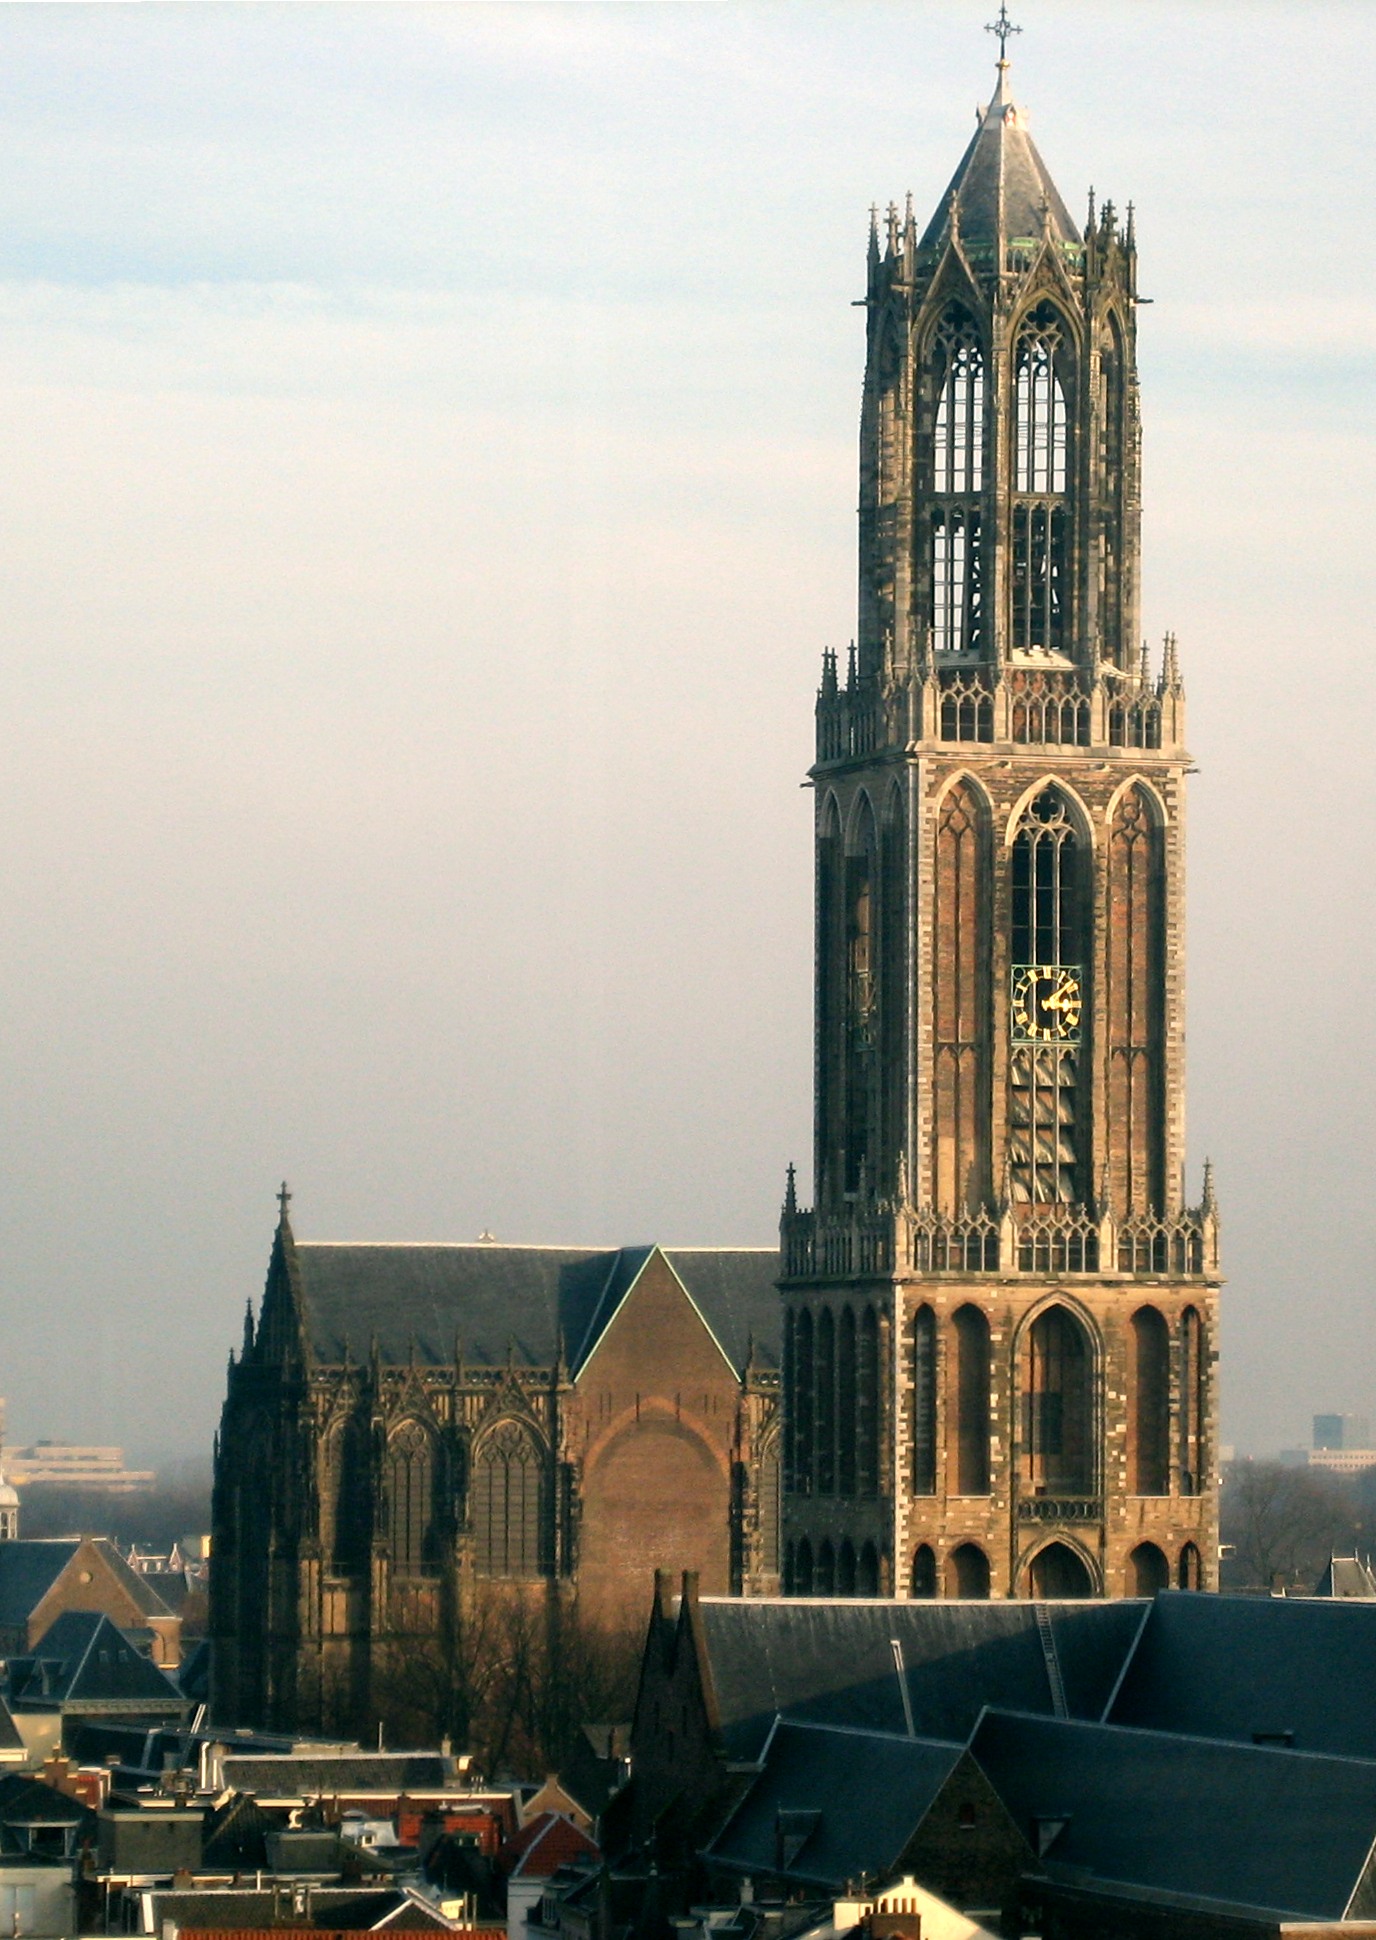 The Domkerk, Utrecht's most majestic and historic icon, will finally be part of LGW